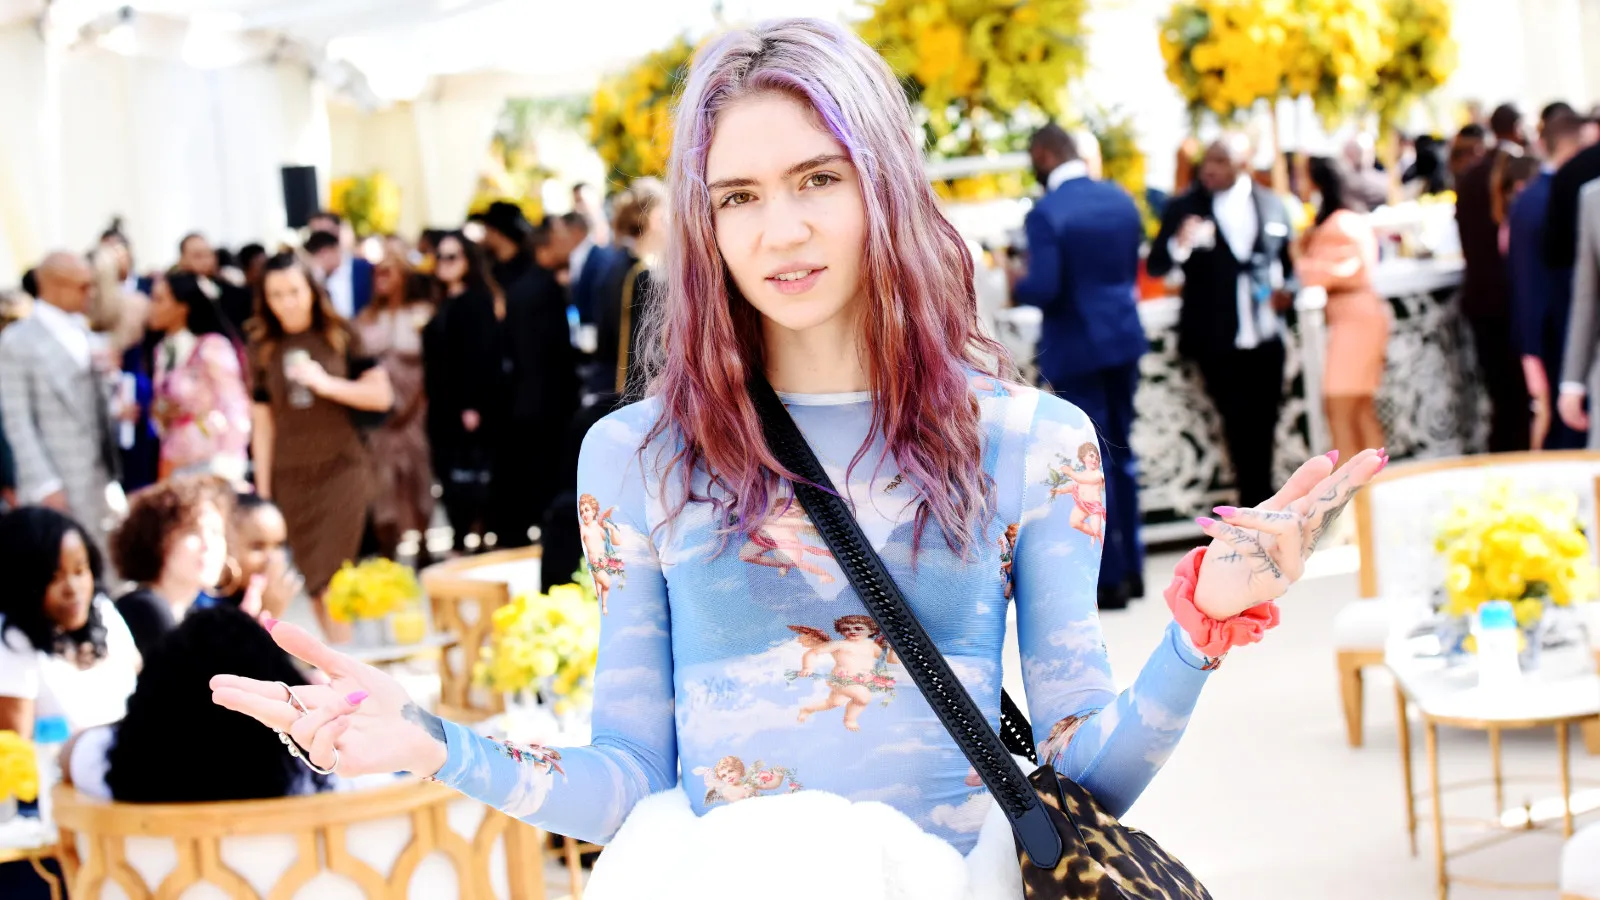 Grimes attends the 2019 Rock Nation The Brunch on February 9, 2019 in Los Angeles, California.